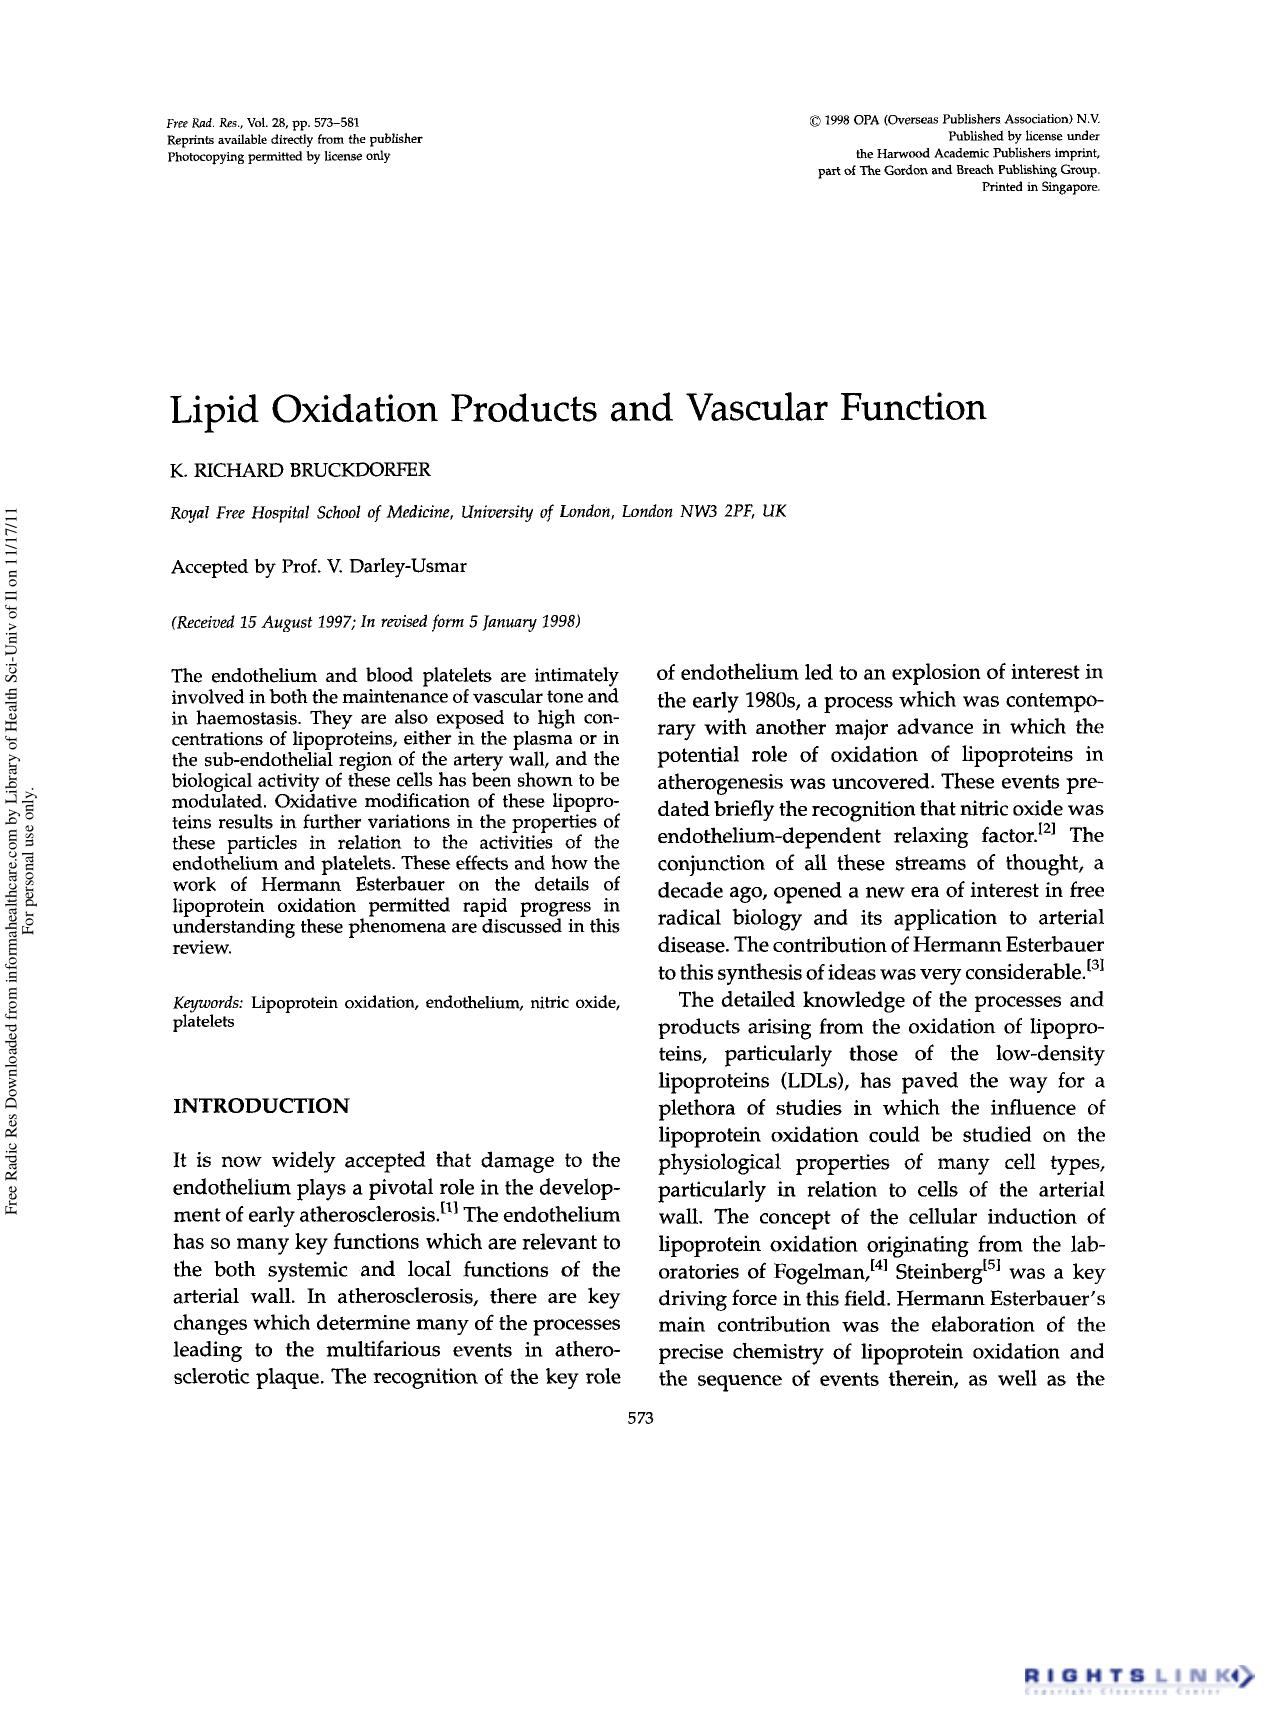 Lipid Oxidation Products and Vascular Function by K. Richard Bruckdorfer